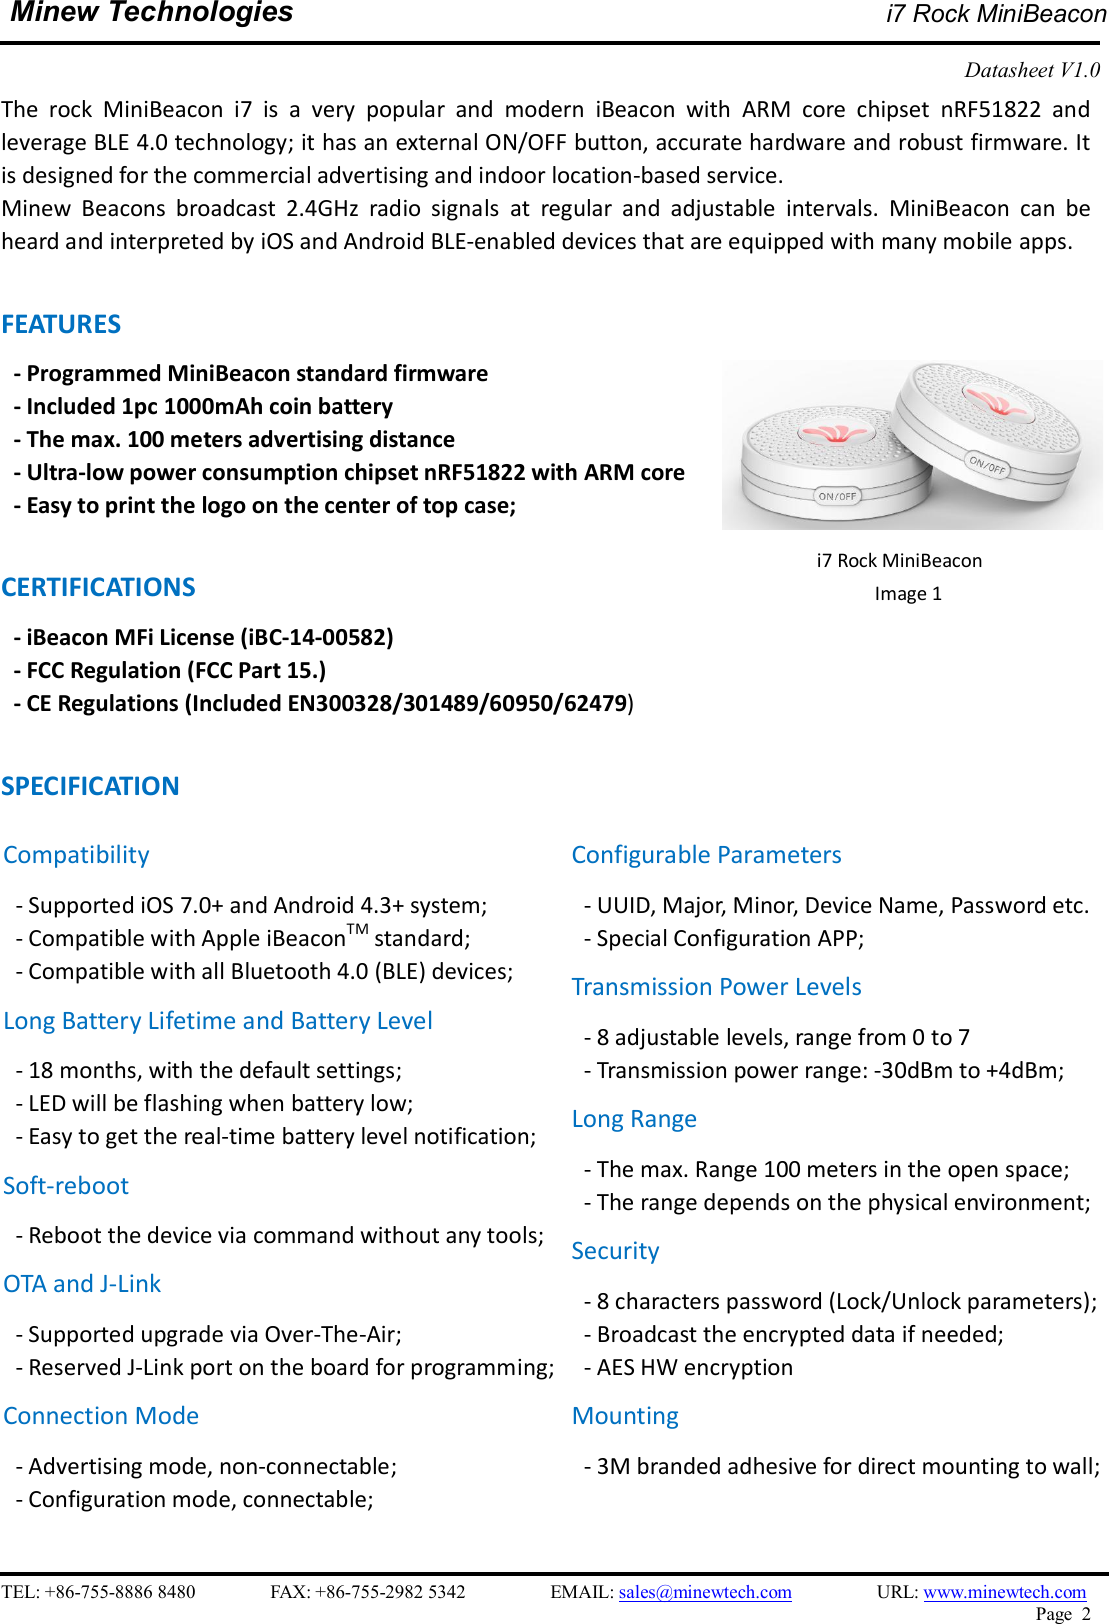    TEL: +86-755-8886 8480                FAX: +86-755-2982 5342                  EMAIL: sales@minewtech.com                  URL: www.minewtech.com Page  2  Minew Technologies i7 Rock MiniBeacon  Datasheet V1.0    The  rock  MiniBeacon  i7  is  a  very  popular  and  modern  iBeacon  with  ARM  core  chipset  nRF51822  and leverage BLE 4.0 technology; it has an external ON/OFF button, accurate hardware and robust firmware. It is designed for the commercial advertising and indoor location-based service. Minew  Beacons  broadcast  2.4GHz  radio  signals  at  regular  and  adjustable  intervals.  MiniBeacon  can  be heard and interpreted by iOS and Android BLE-enabled devices that are equipped with many mobile apps.  FEATURES   - Programmed MiniBeacon standard firmware   - Included 1pc 1000mAh coin battery - The max. 100 meters advertising distance - Ultra-low power consumption chipset nRF51822 with ARM core - Easy to print the logo on the center of top case;  CERTIFICATIONS - iBeacon MFi License (iBC-14-00582)   - FCC Regulation (FCC Part 15.) - CE Regulations (Included EN300328/301489/60950/62479)  SPECIFICATION                                  i7 Rock MiniBeacon Image 1   Compatibility - Supported iOS 7.0+ and Android 4.3+ system; - Compatible with Apple iBeaconTM standard;   - Compatible with all Bluetooth 4.0 (BLE) devices; Long Battery Lifetime and Battery Level - 18 months, with the default settings; - LED will be flashing when battery low; - Easy to get the real-time battery level notification; Soft-reboot   - Reboot the device via command without any tools;   OTA and J-Link - Supported upgrade via Over-The-Air;   - Reserved J-Link port on the board for programming;   Connection Mode - Advertising mode, non-connectable;   - Configuration mode, connectable;  Configurable Parameters - UUID, Major, Minor, Device Name, Password etc. - Special Configuration APP; Transmission Power Levels - 8 adjustable levels, range from 0 to 7 - Transmission power range: -30dBm to +4dBm;   Long Range - The max. Range 100 meters in the open space;   - The range depends on the physical environment; Security - 8 characters password (Lock/Unlock parameters);   - Broadcast the encrypted data if needed; - AES HW encryption Mounting - 3M branded adhesive for direct mounting to wall;    